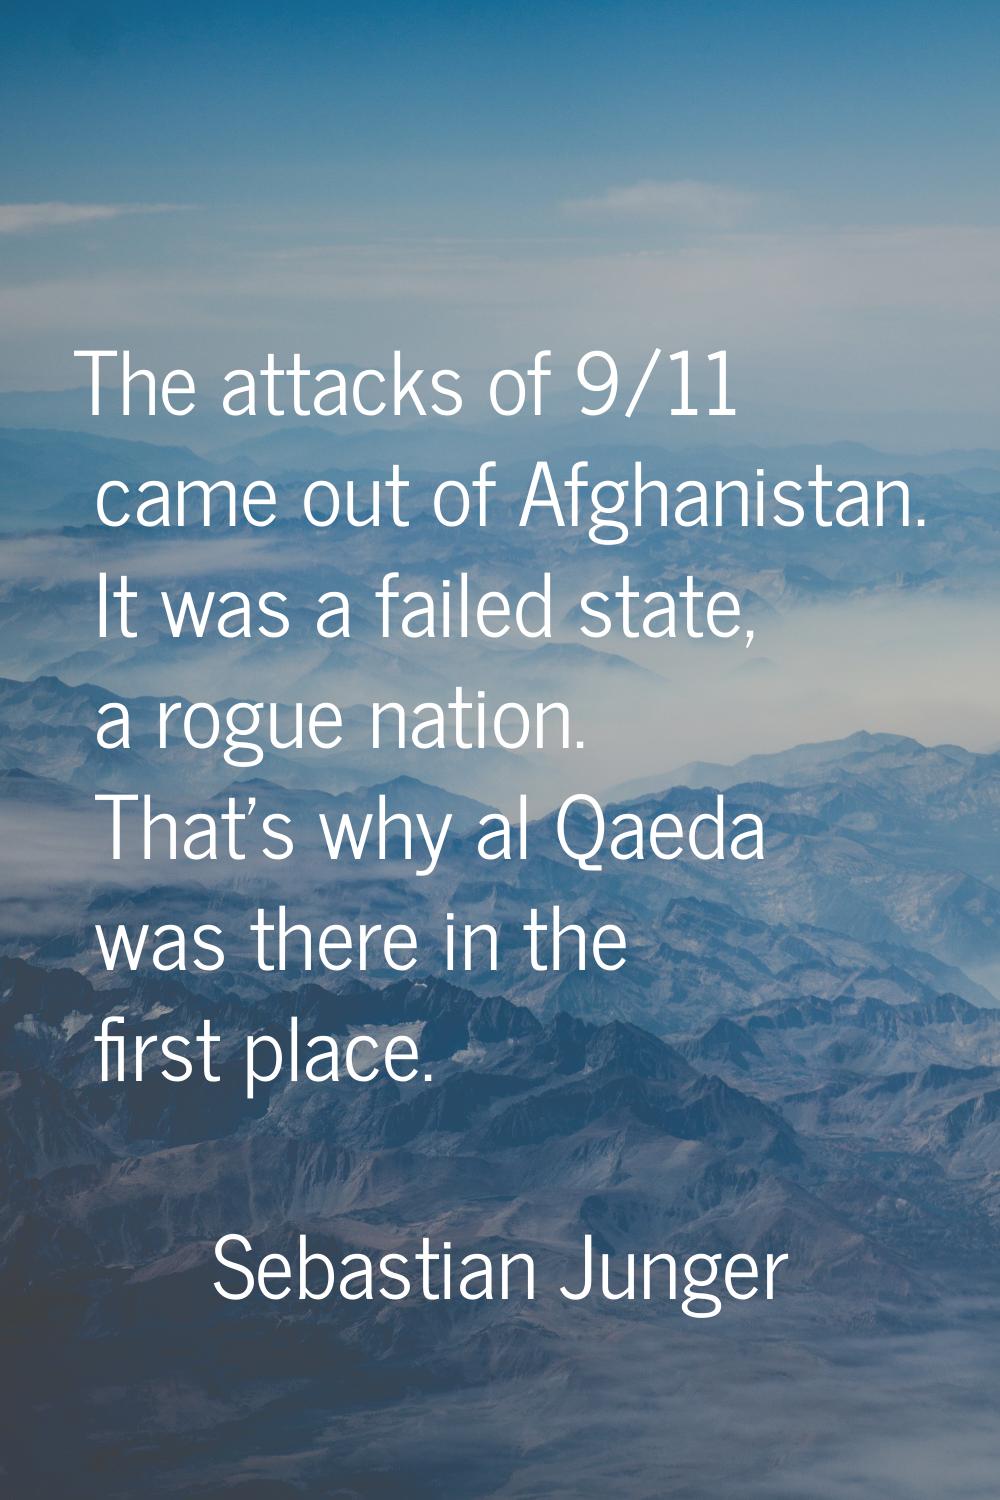 The attacks of 9/11 came out of Afghanistan. It was a failed state, a rogue nation. That's why al Q